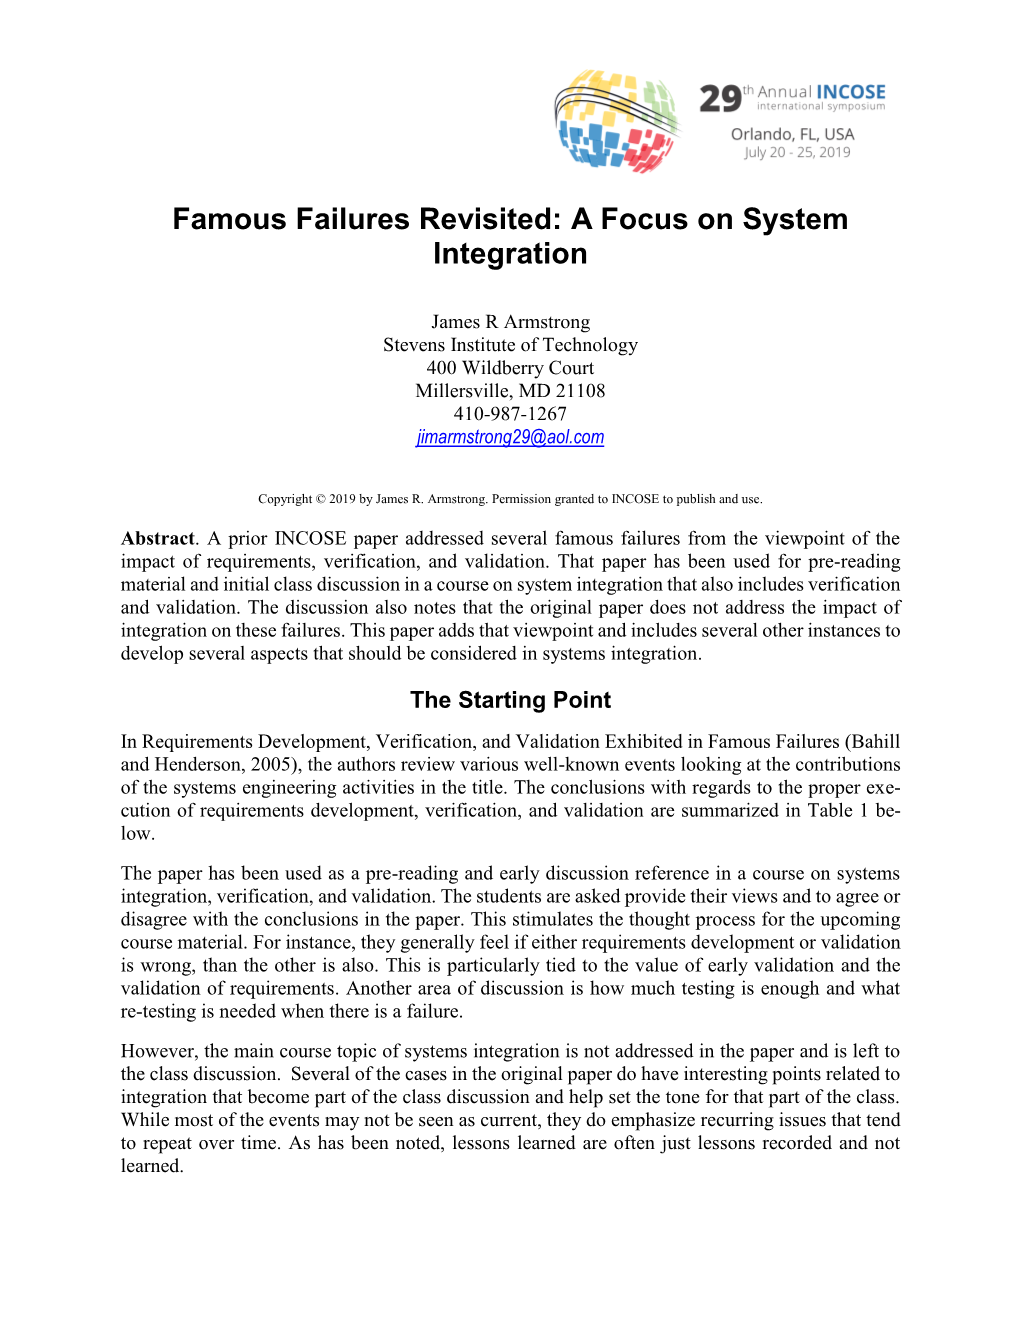 Famous Failures Revisited: a Focus on System Integration